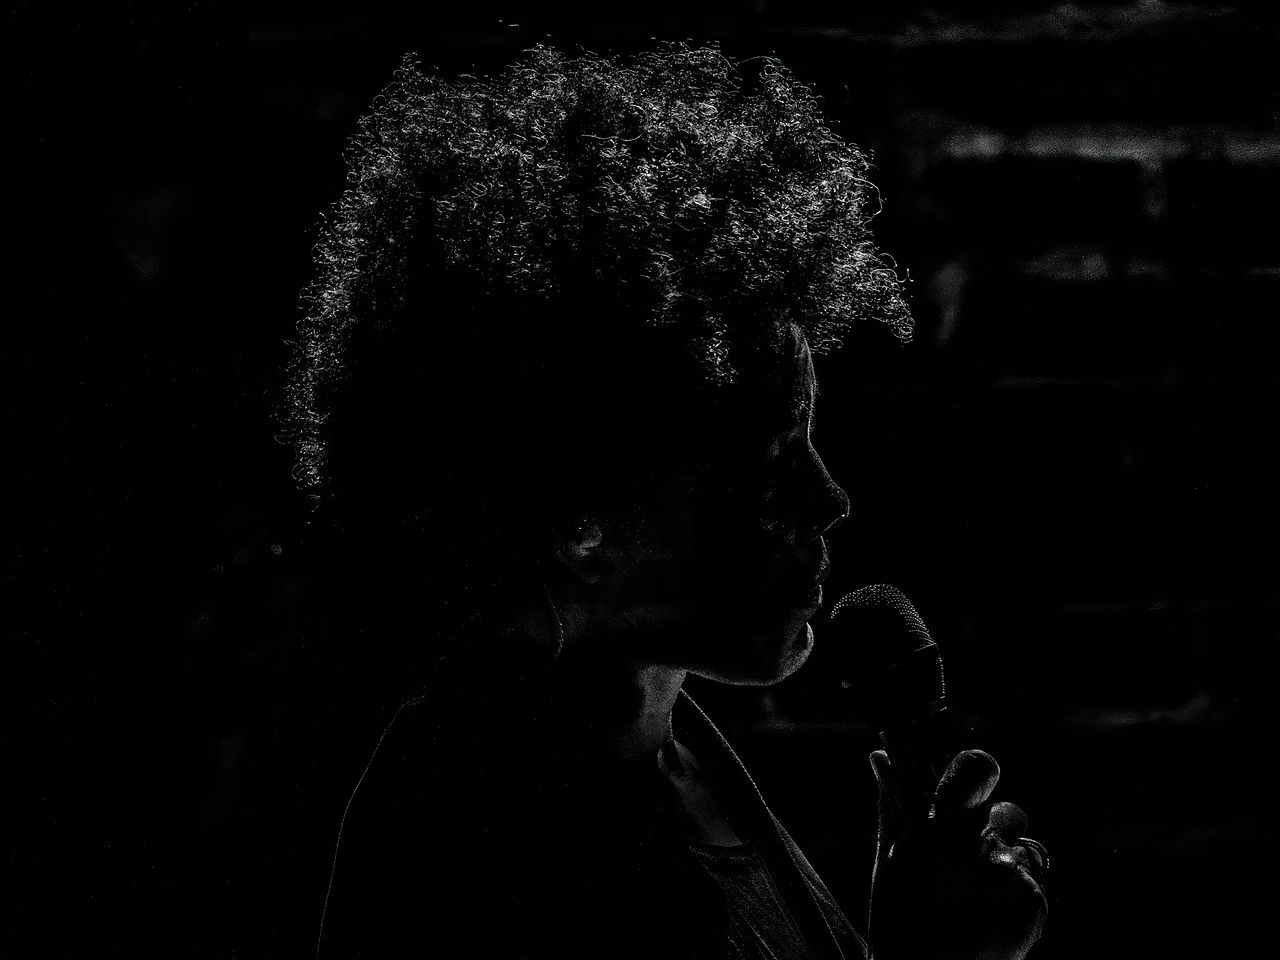 darkness, black, black and white, one person, portrait, headshot, monochrome, monochrome photography, adult, young adult, dark, indoors, lifestyles, light, looking, close-up, leisure activity, curly hair, black background, contemplation, sadness, hairstyle, men